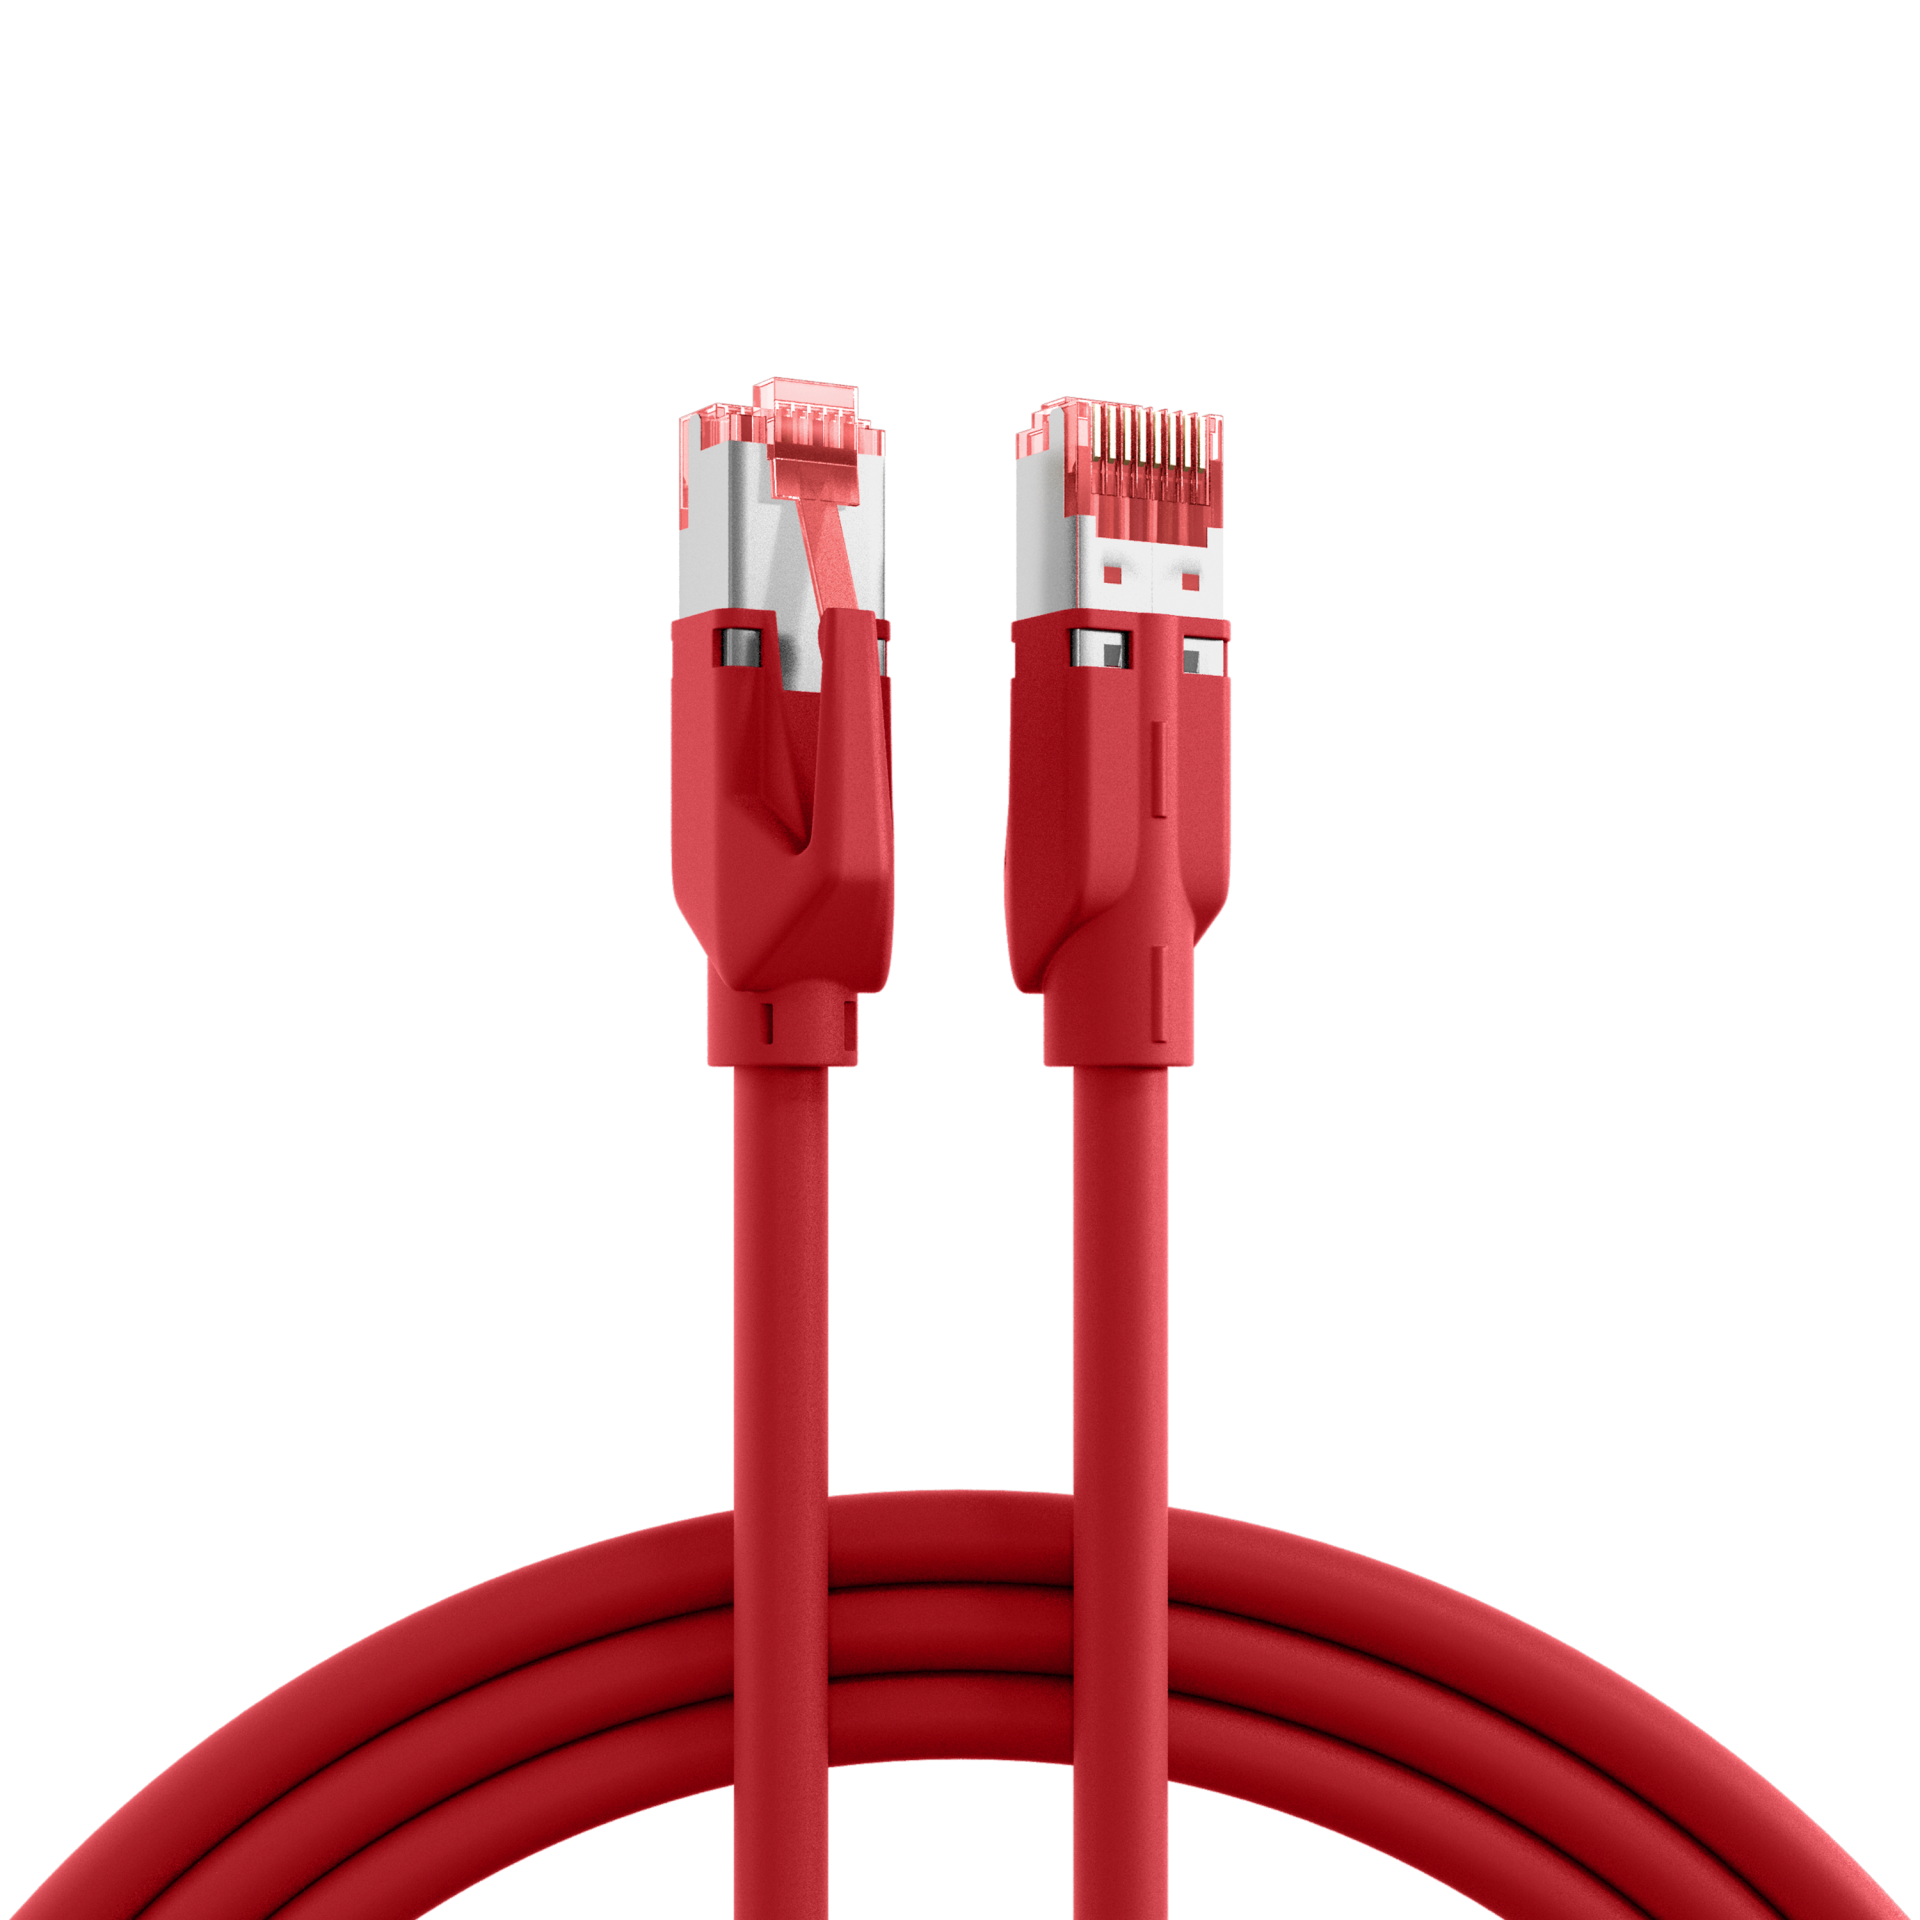 RJ45 Patch Cord Cat.6A S/FTP Dätwyler 7702 TM21 red 20m